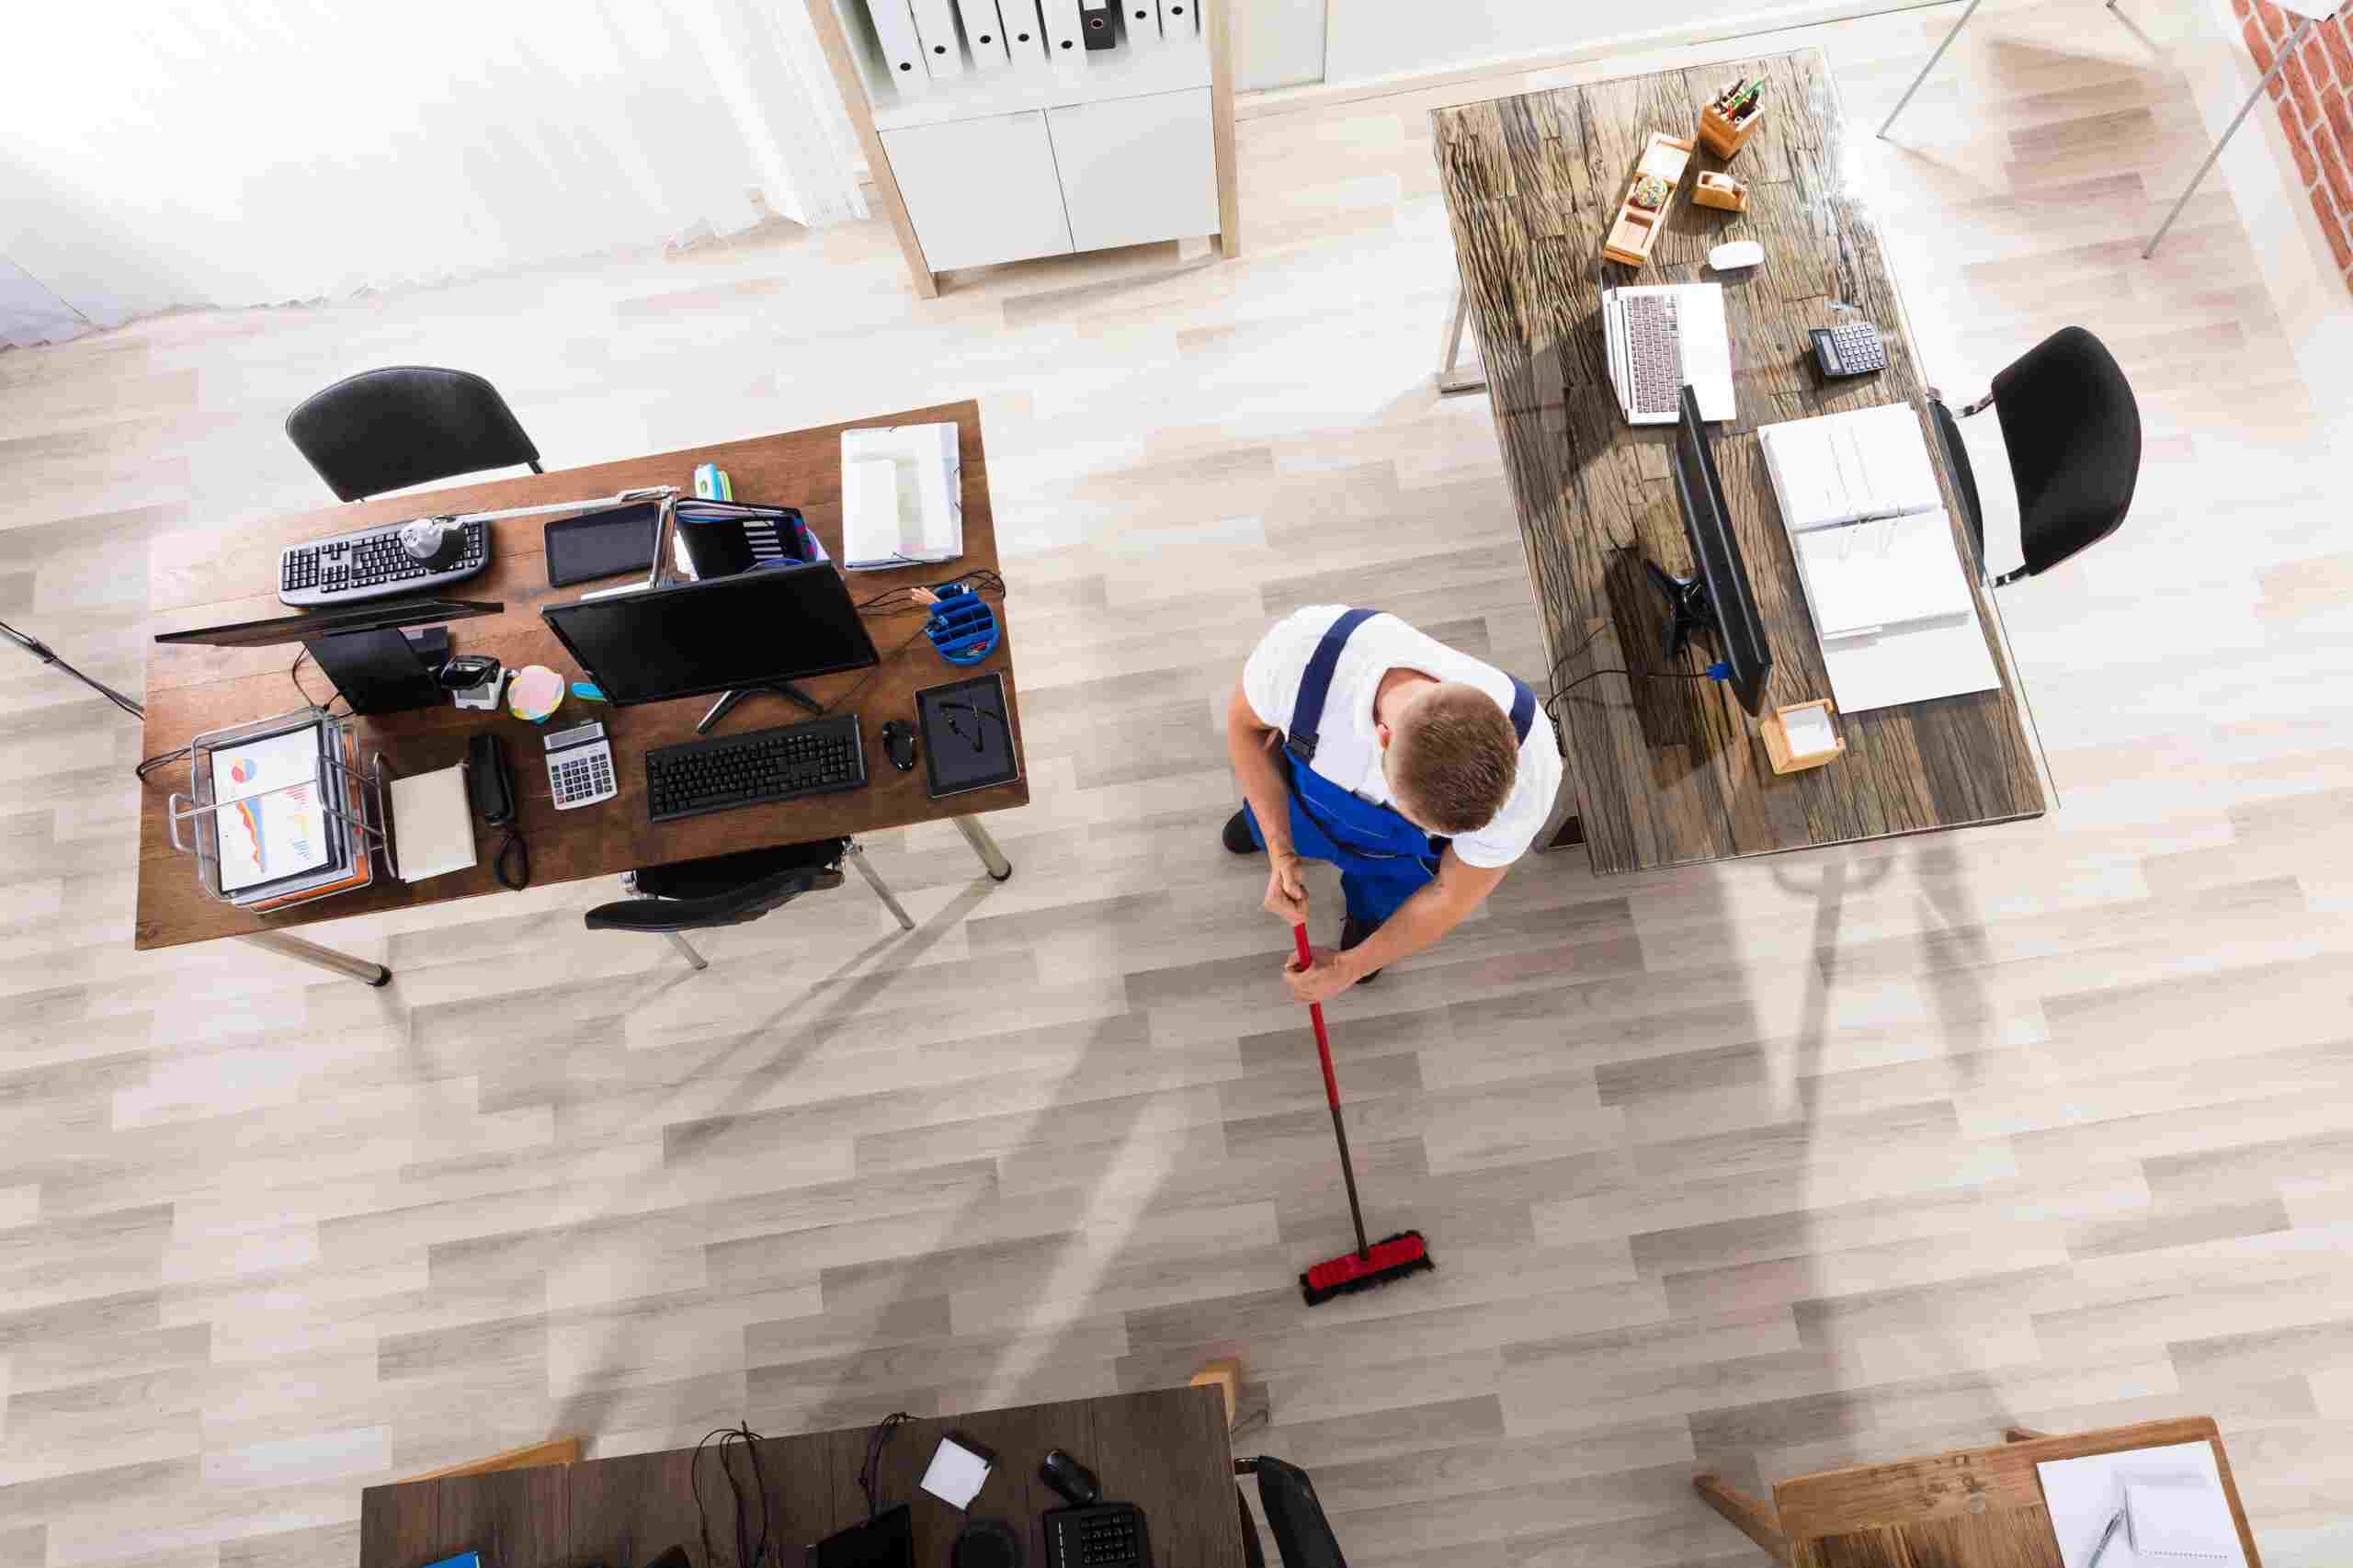 Man in blue jumpsuit keeping collaborative workspace clean with a broom